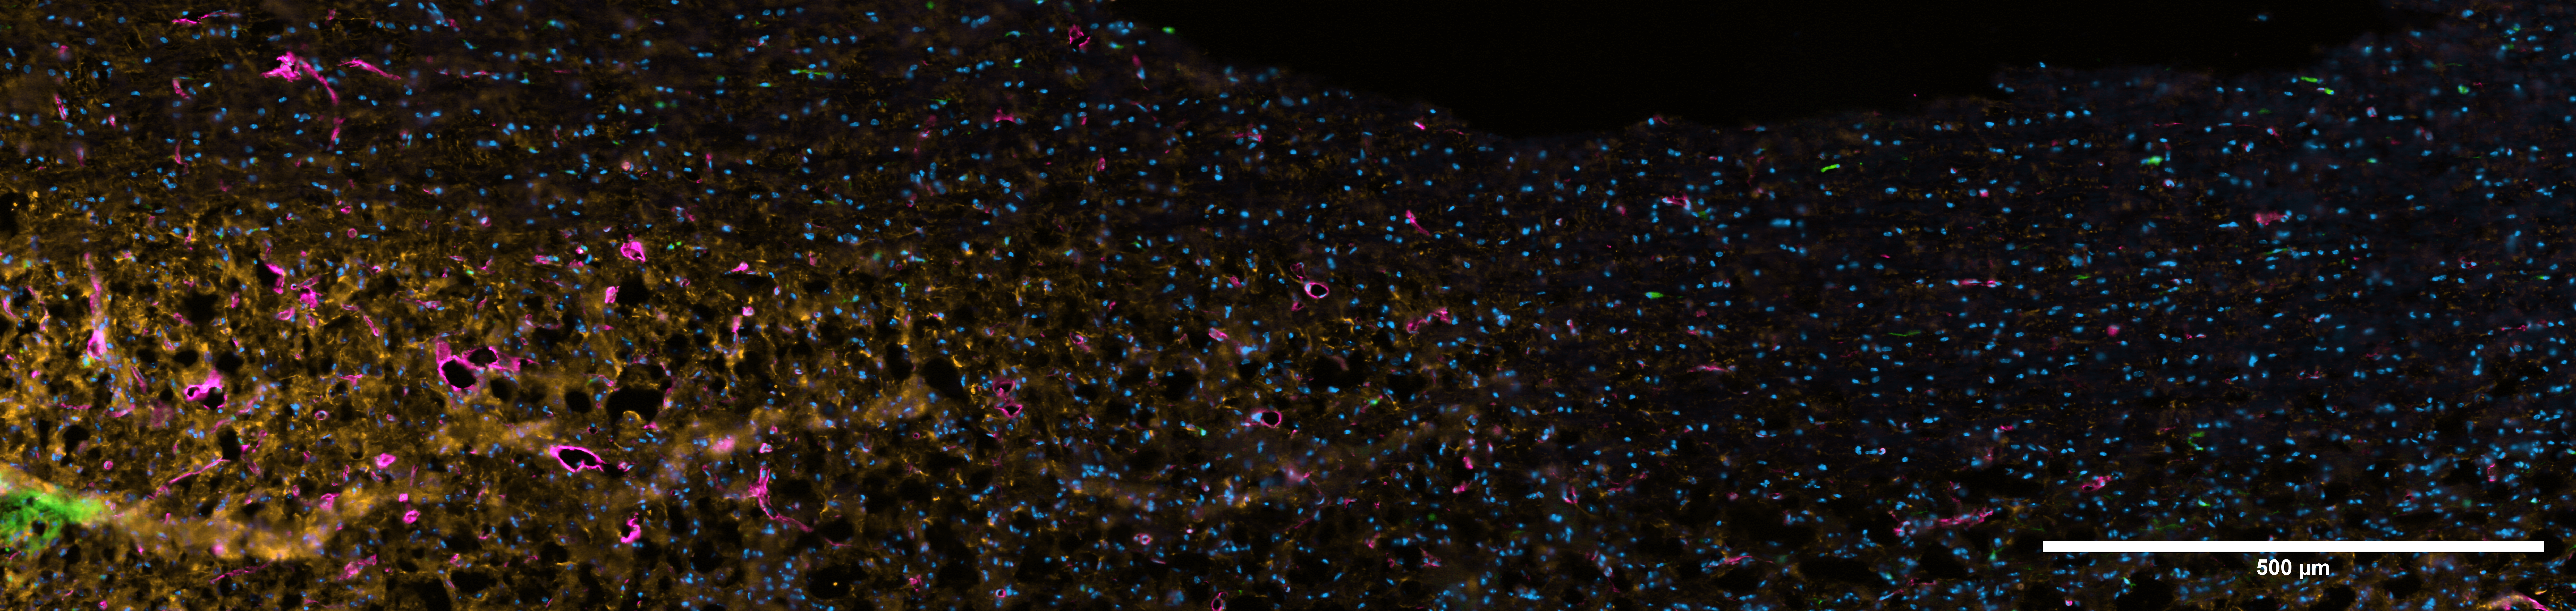 Spinal Cord labelled with DAPI/EGFP-Lamnin-GFAP, acquired using the CoolLED pE-800 Illumination System. Image courtesy of Melanie Mertens and Dr. Yeranddy Aguiar Alpizar from the group of Prof. Dr. Bert Brône.